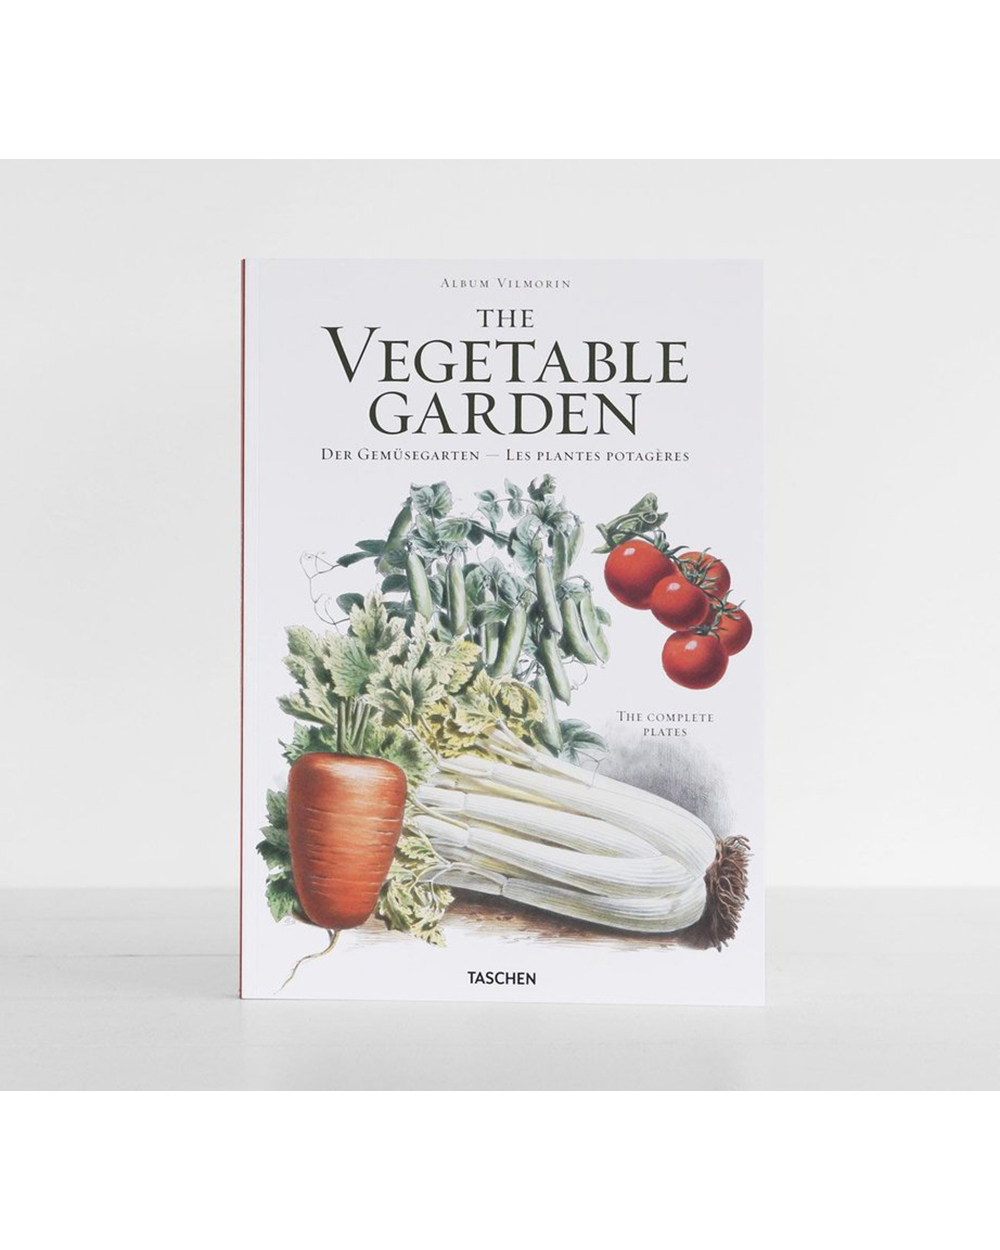 The Vegeable Garden, $55 from Father Rabbit